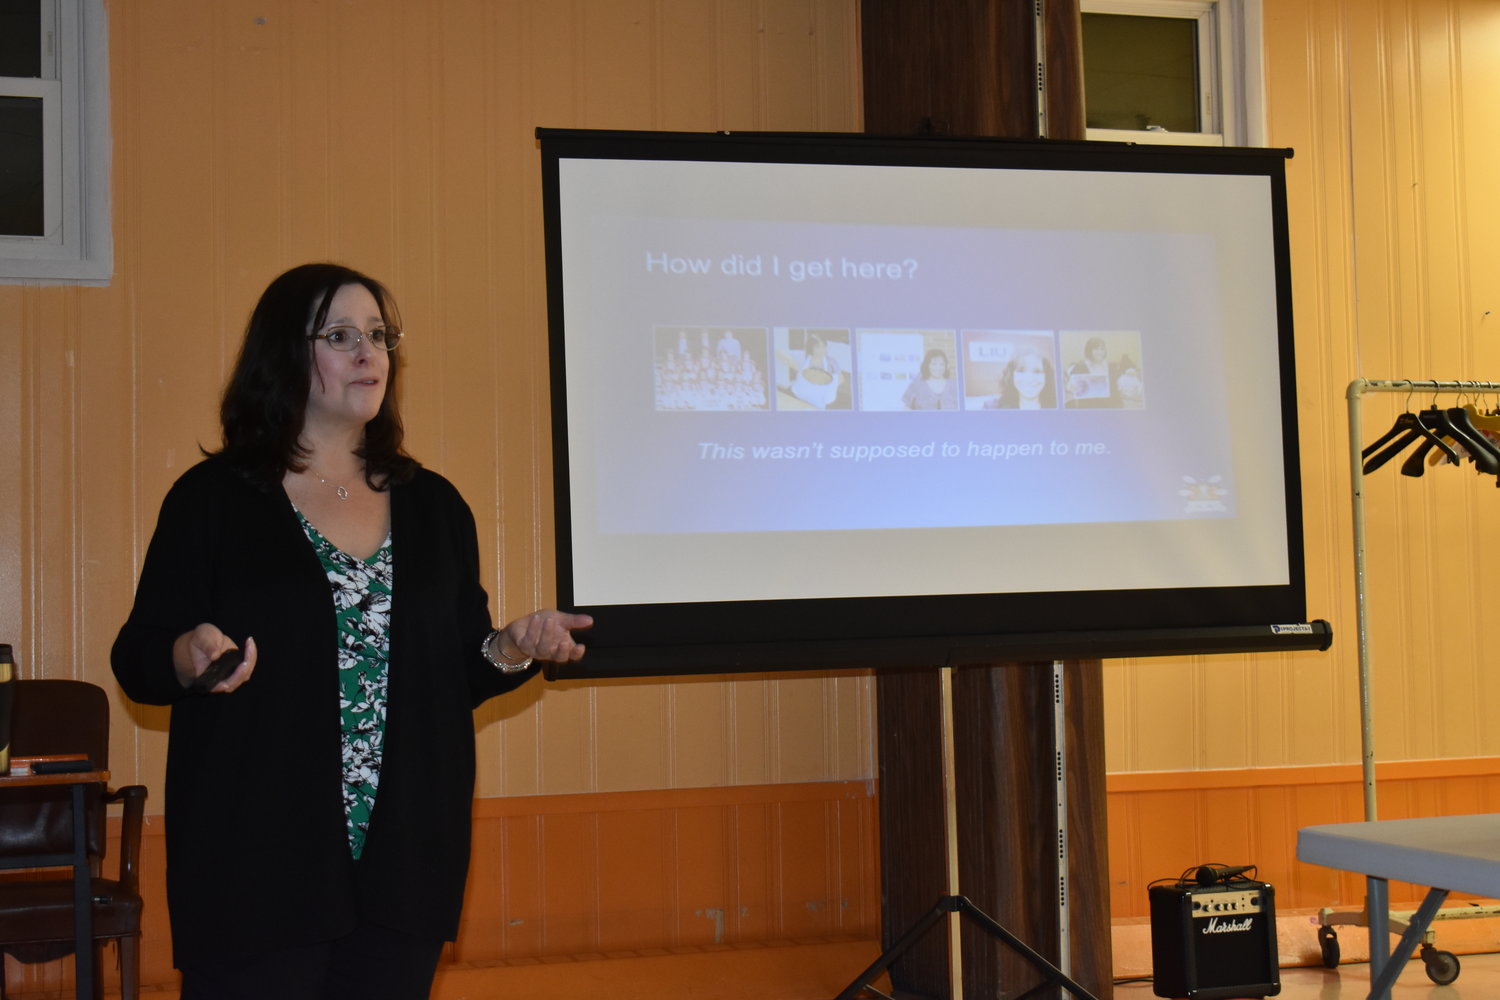 Using her own experience, Valley Stream resident Lisa-Michelle Kucharz discussed how to handle online harassment to both children and adults, at the Oct. 17 JCC cyberbullying workshop.